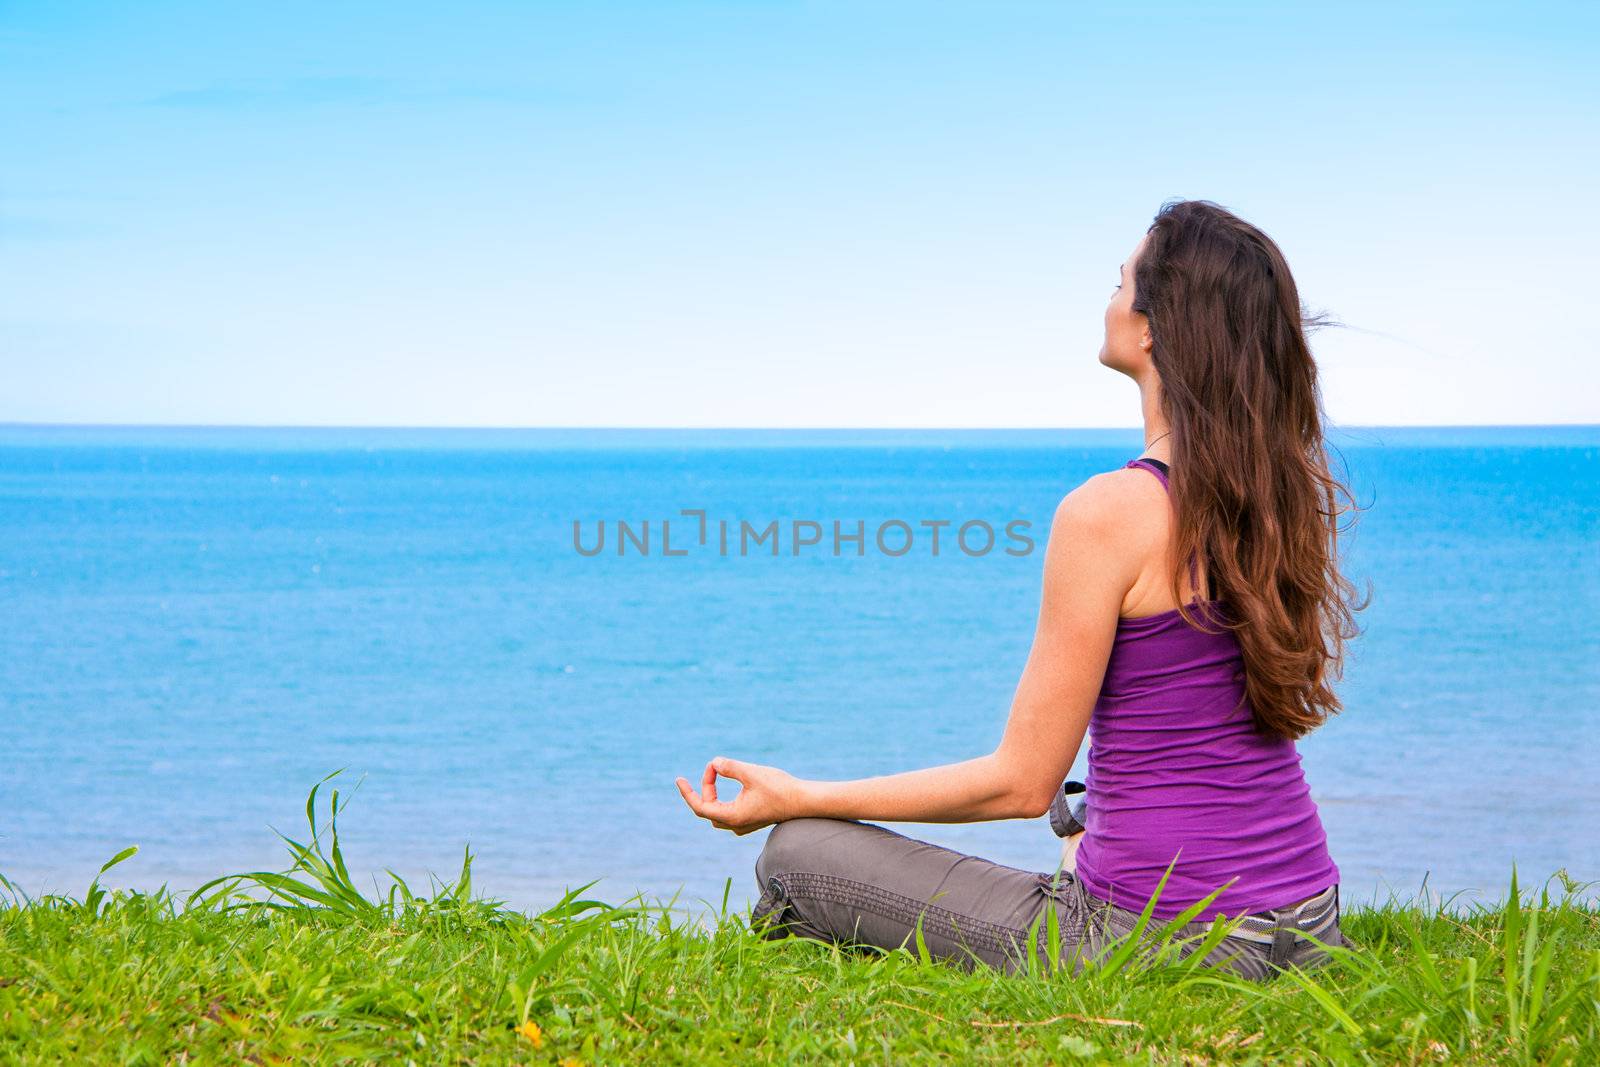 A beautiful young woman sitting meditating with a view of the ocean